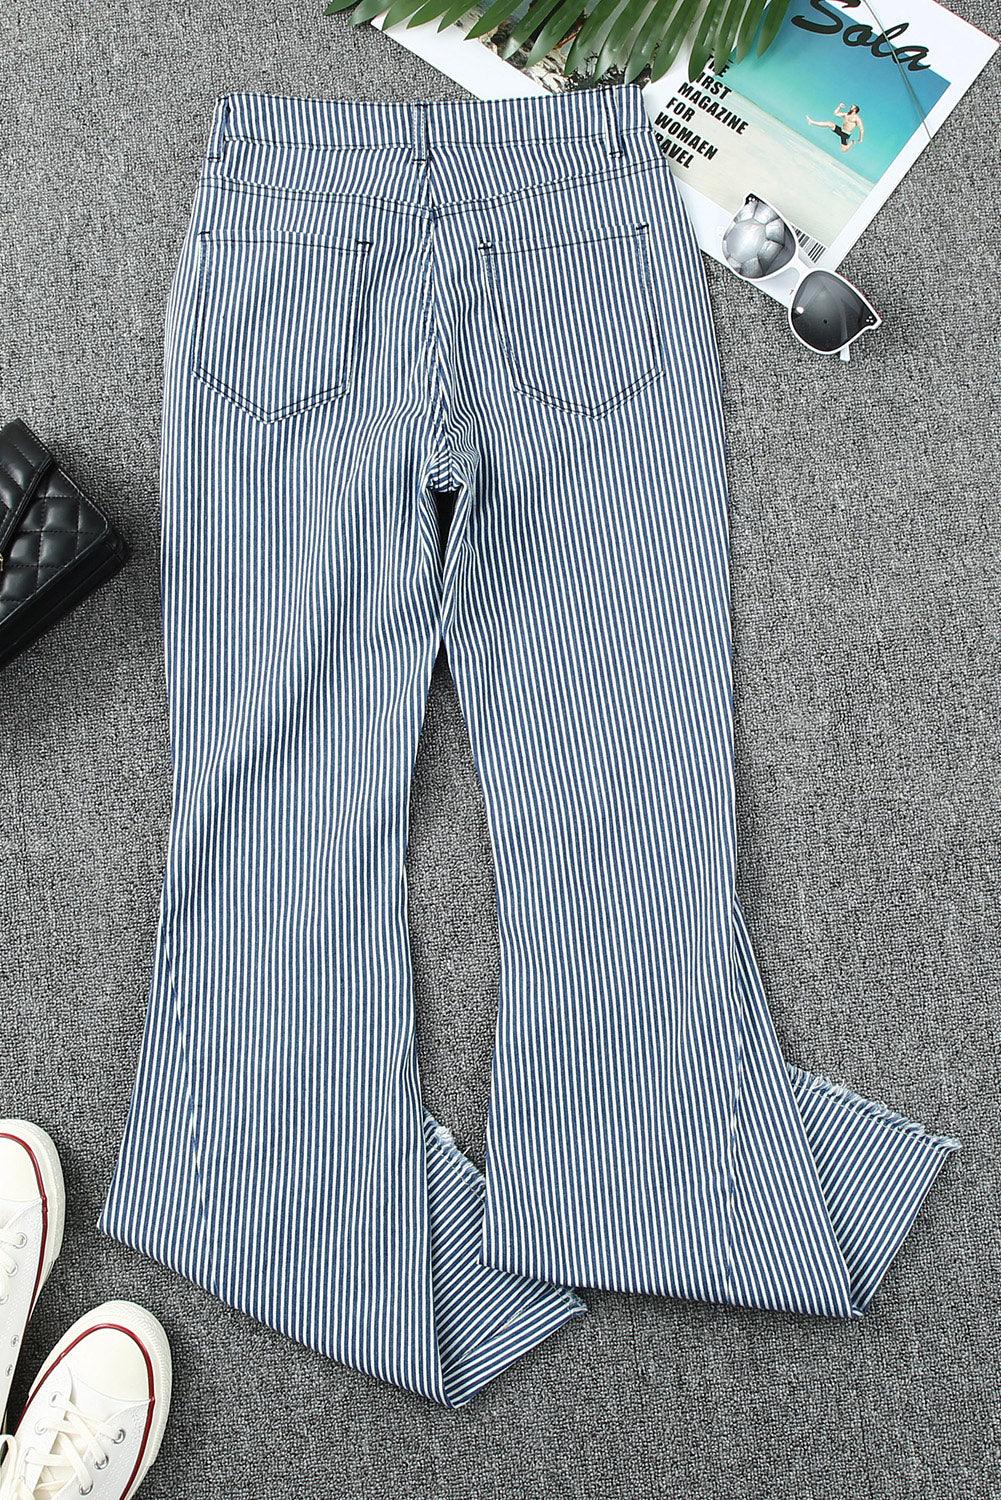 Striped High-Waisted Bell Bottom Denim Pants with Pockets Blue